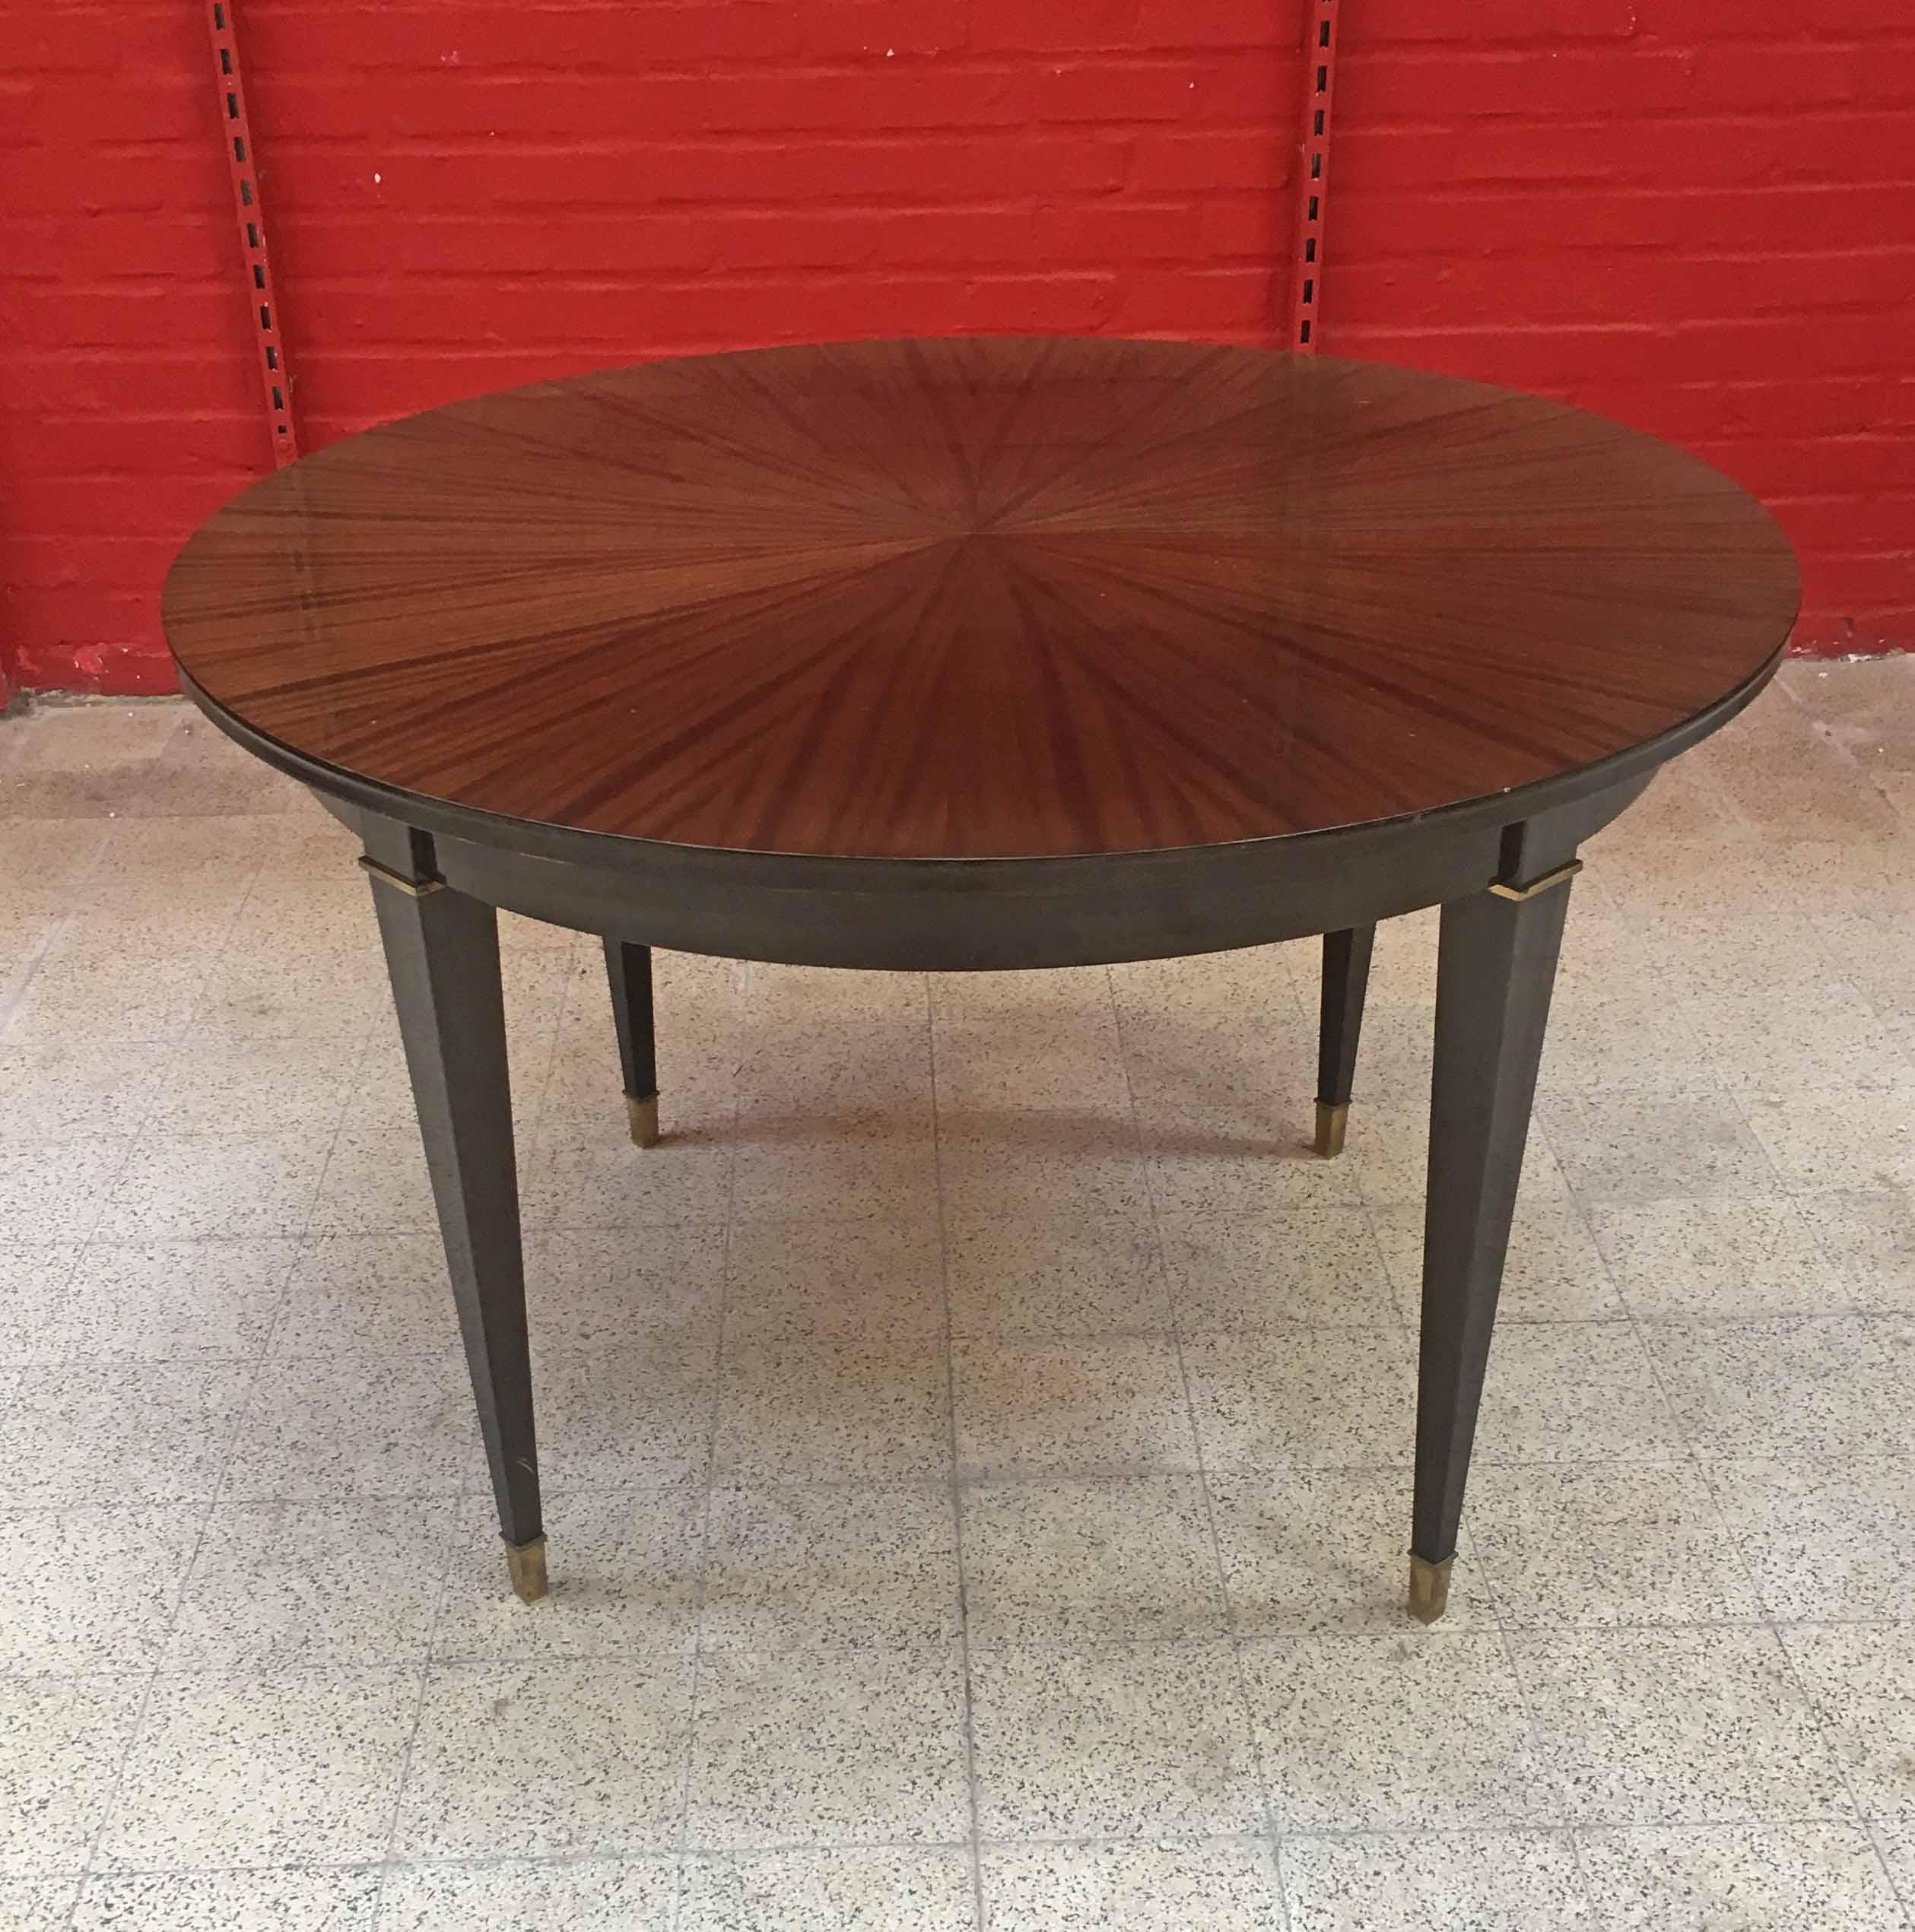 Neoclassical Art Deco table in mahogany, circa 1950. Dimensions: 73 x 115 cm
with 1 leaf 73 x 123 x 115 cm
with 2 leaves 73 x 173 x 115 cm.